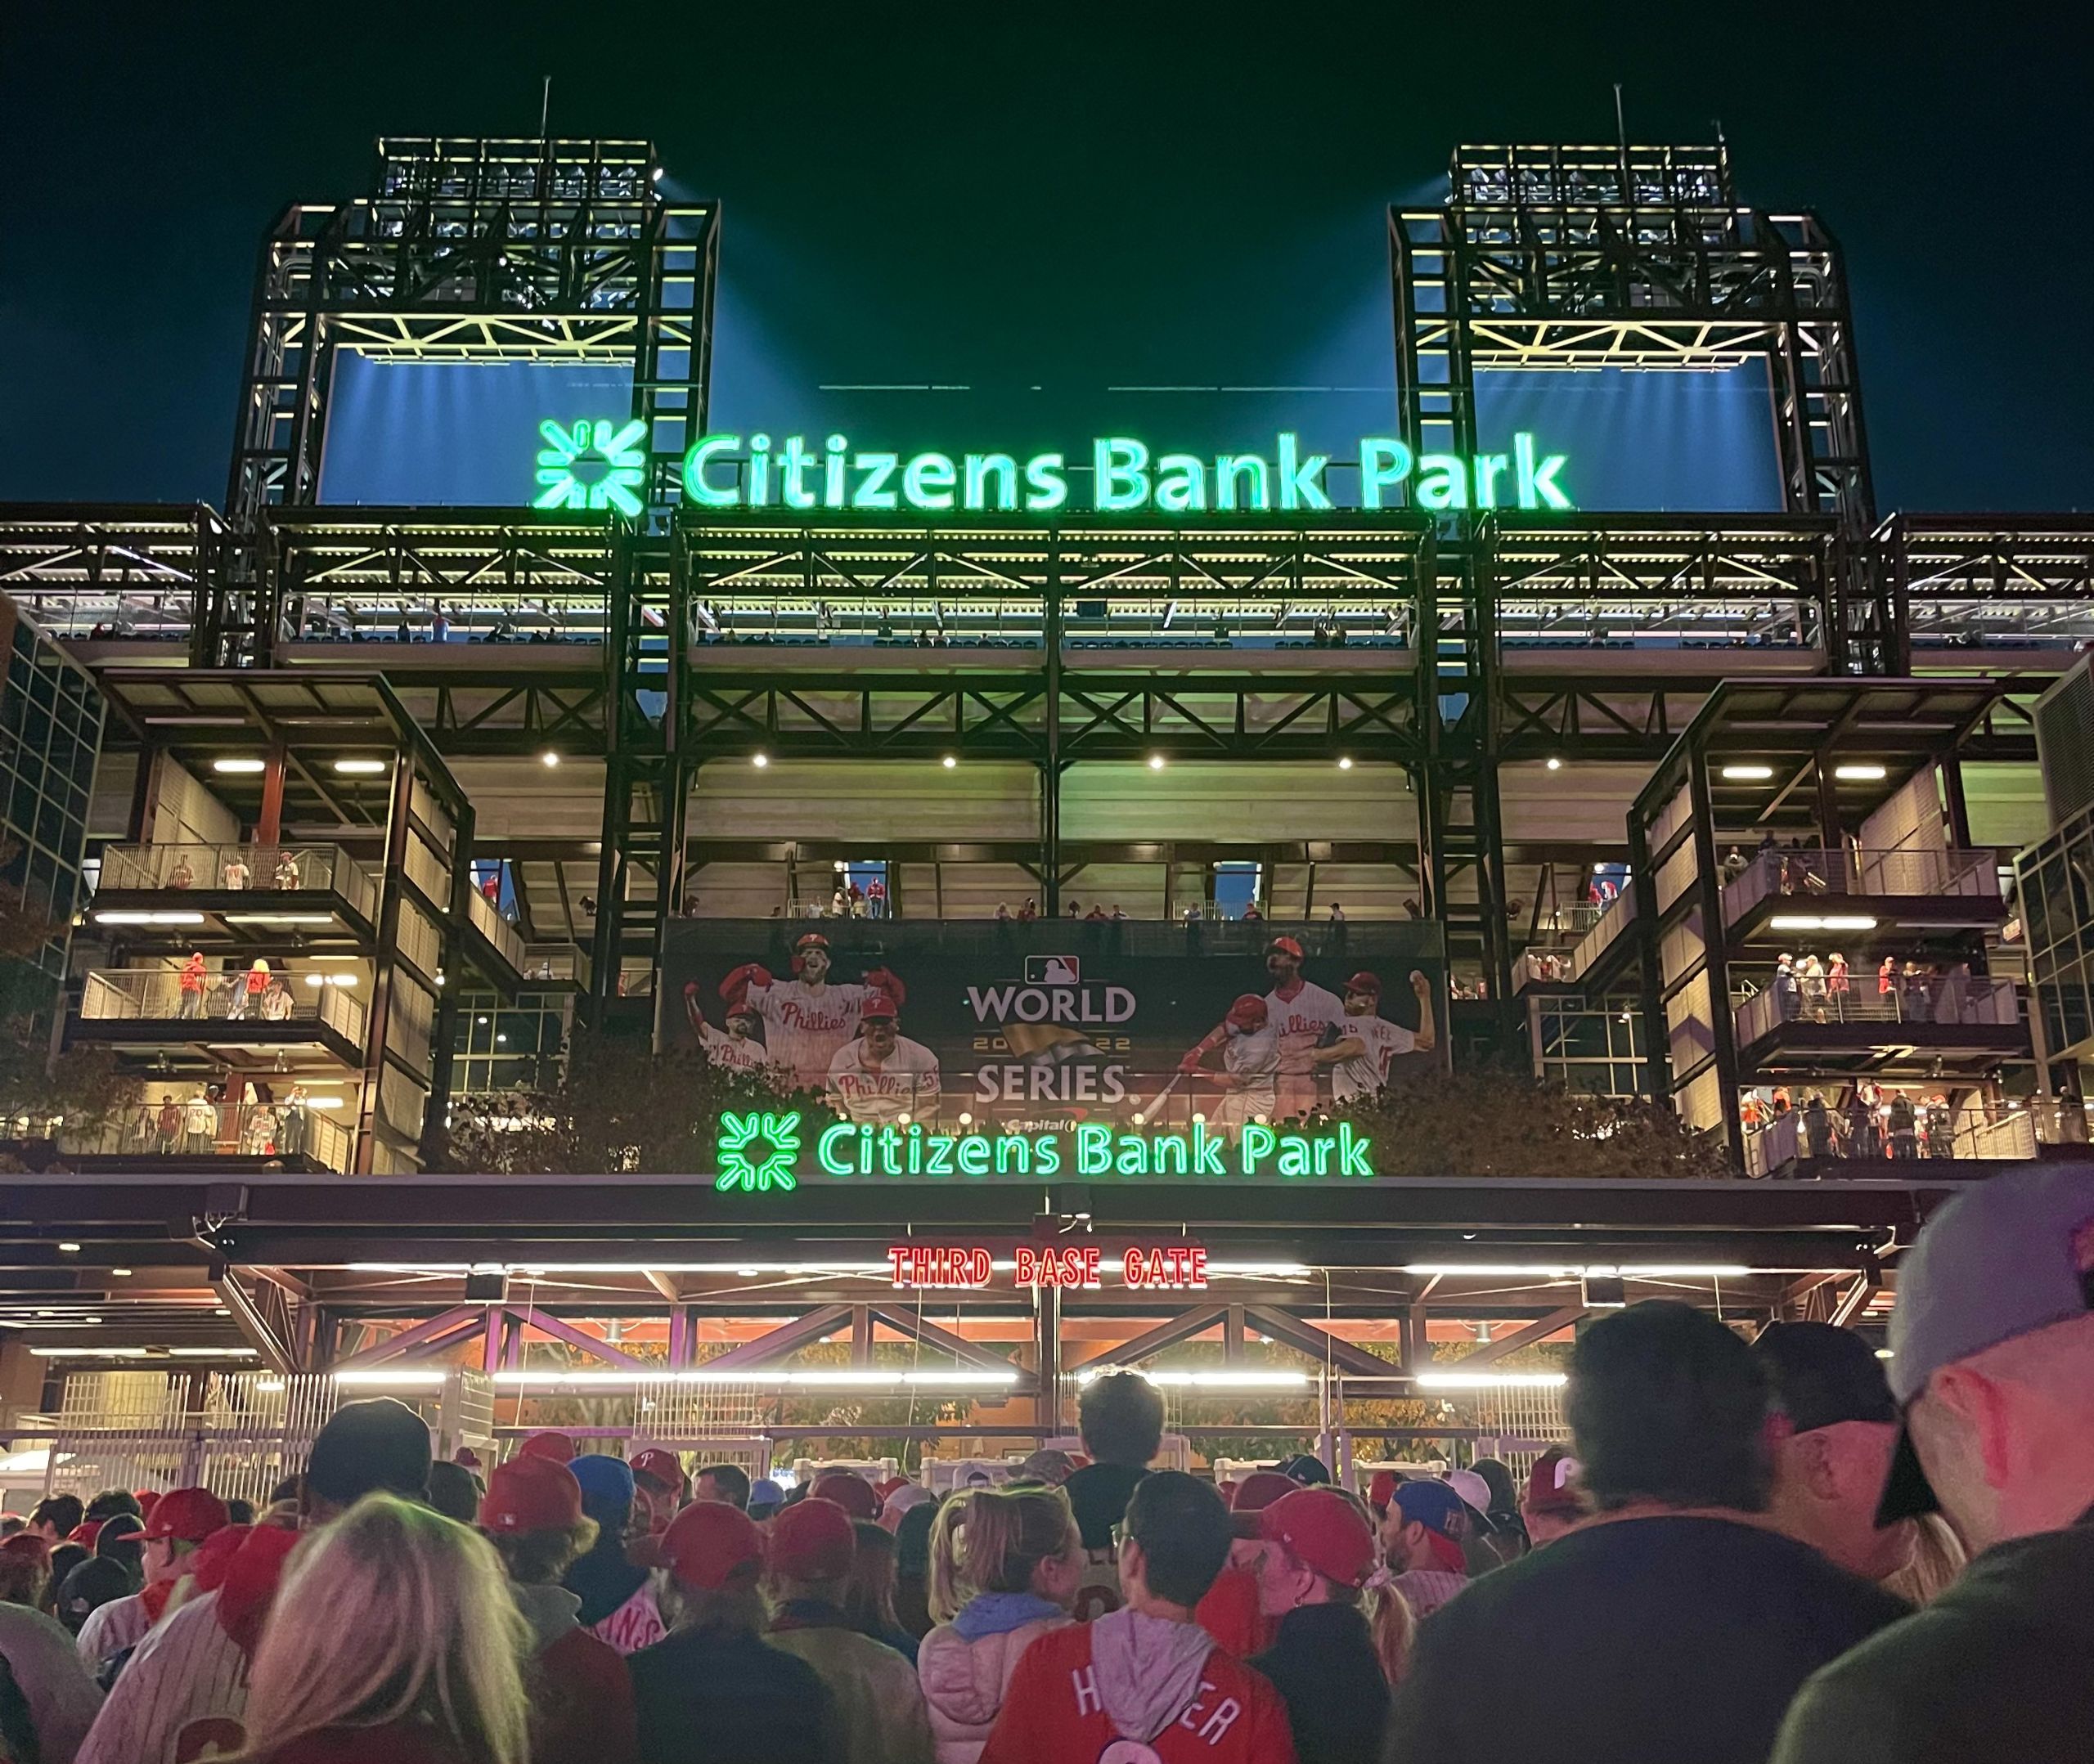 Fans excitedly enter Citizens Bank Park for the World Series game. Photo courtesy of Avery Byrnes.